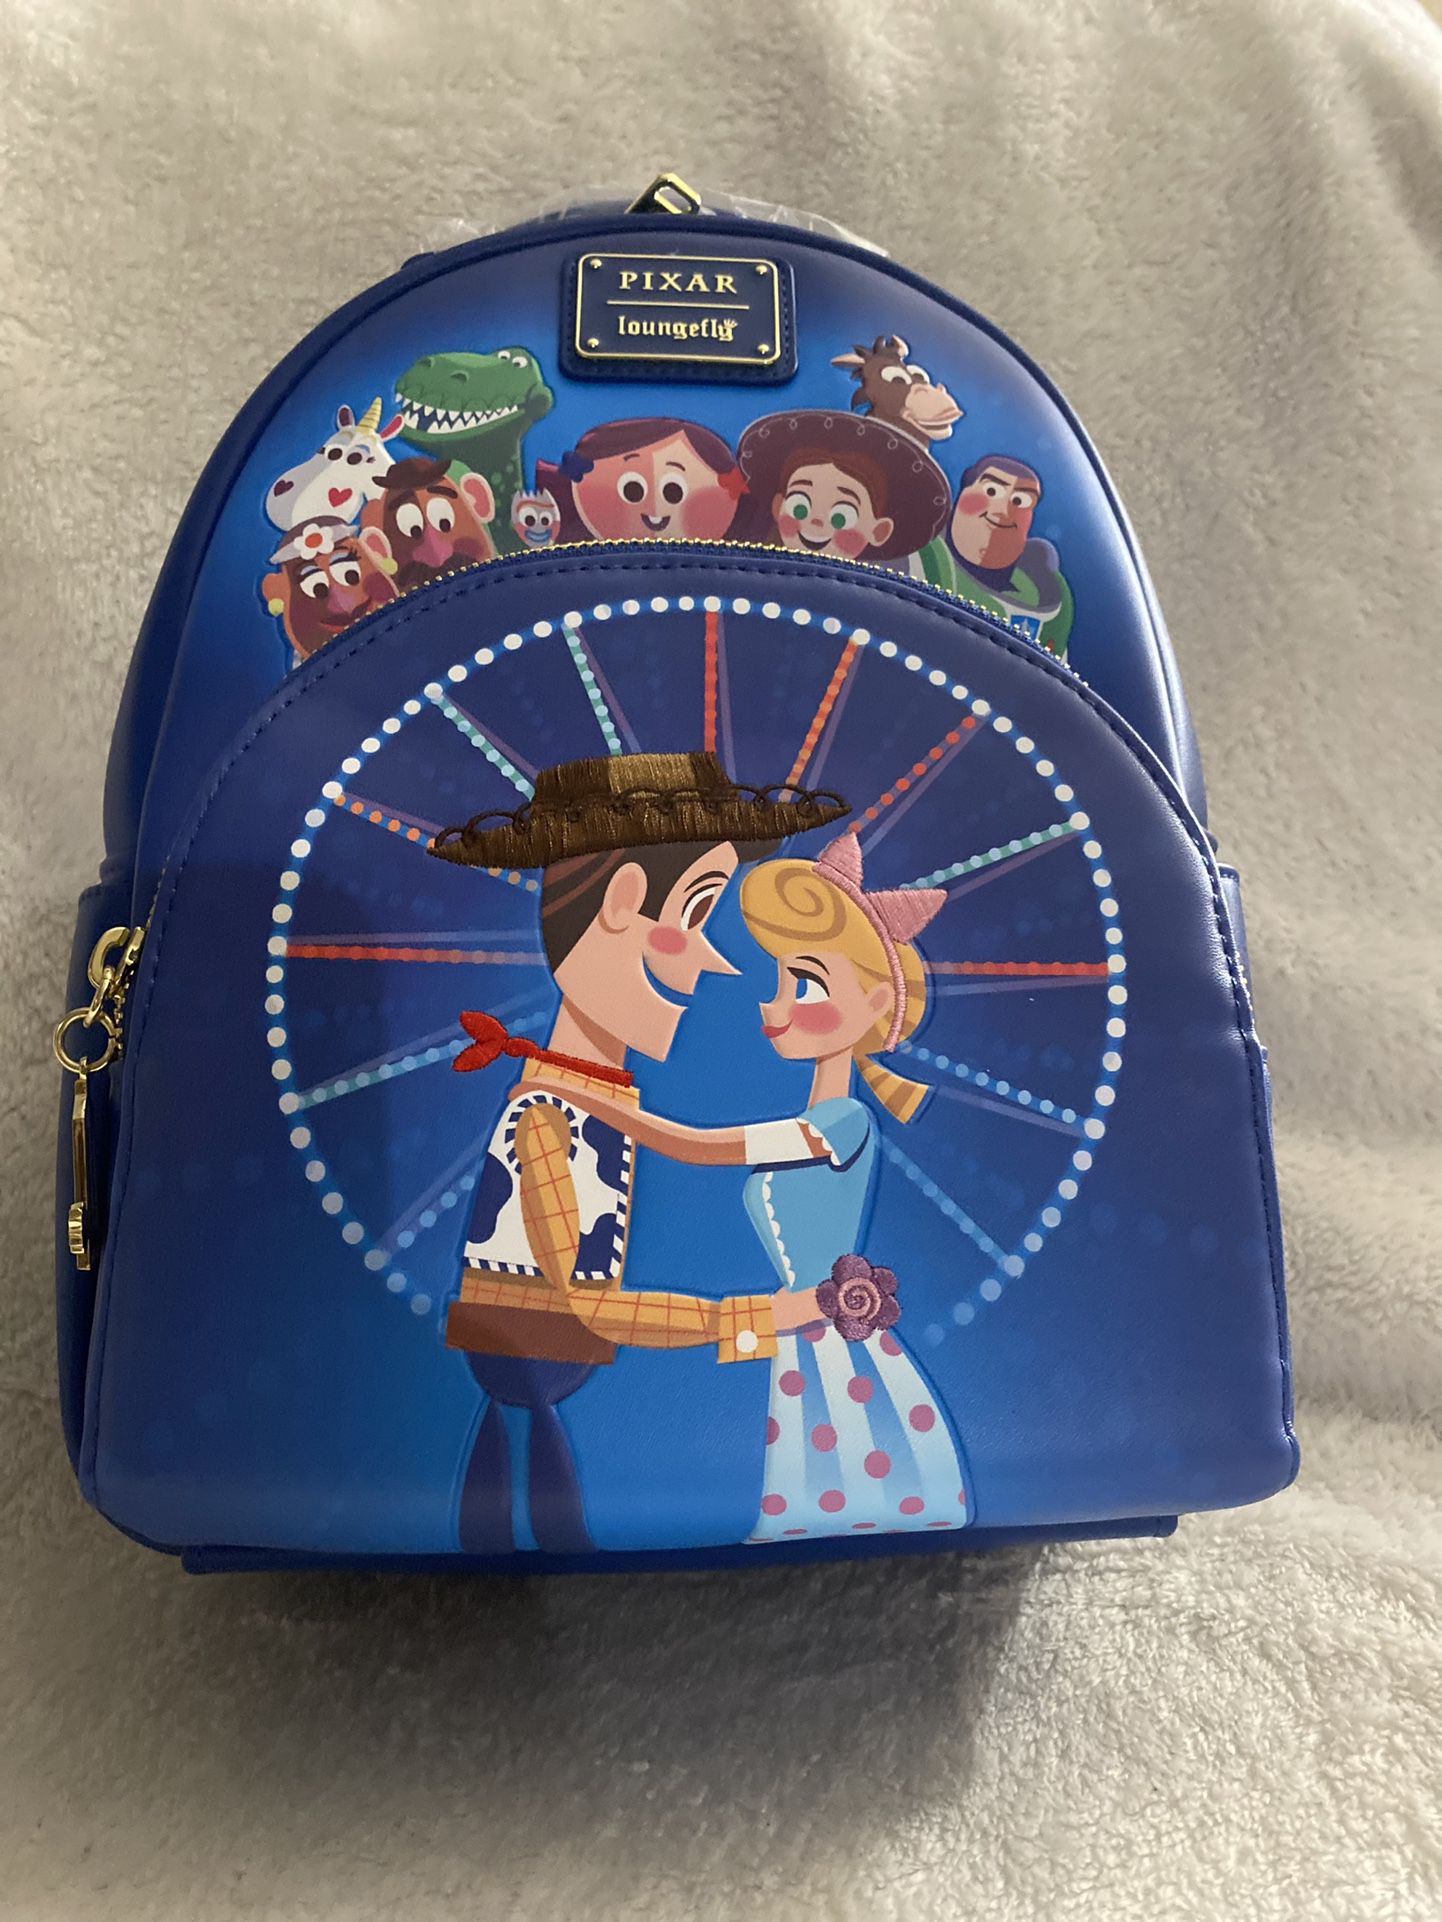 Disney Pixar Loungefly Backpack Toy Story Edition